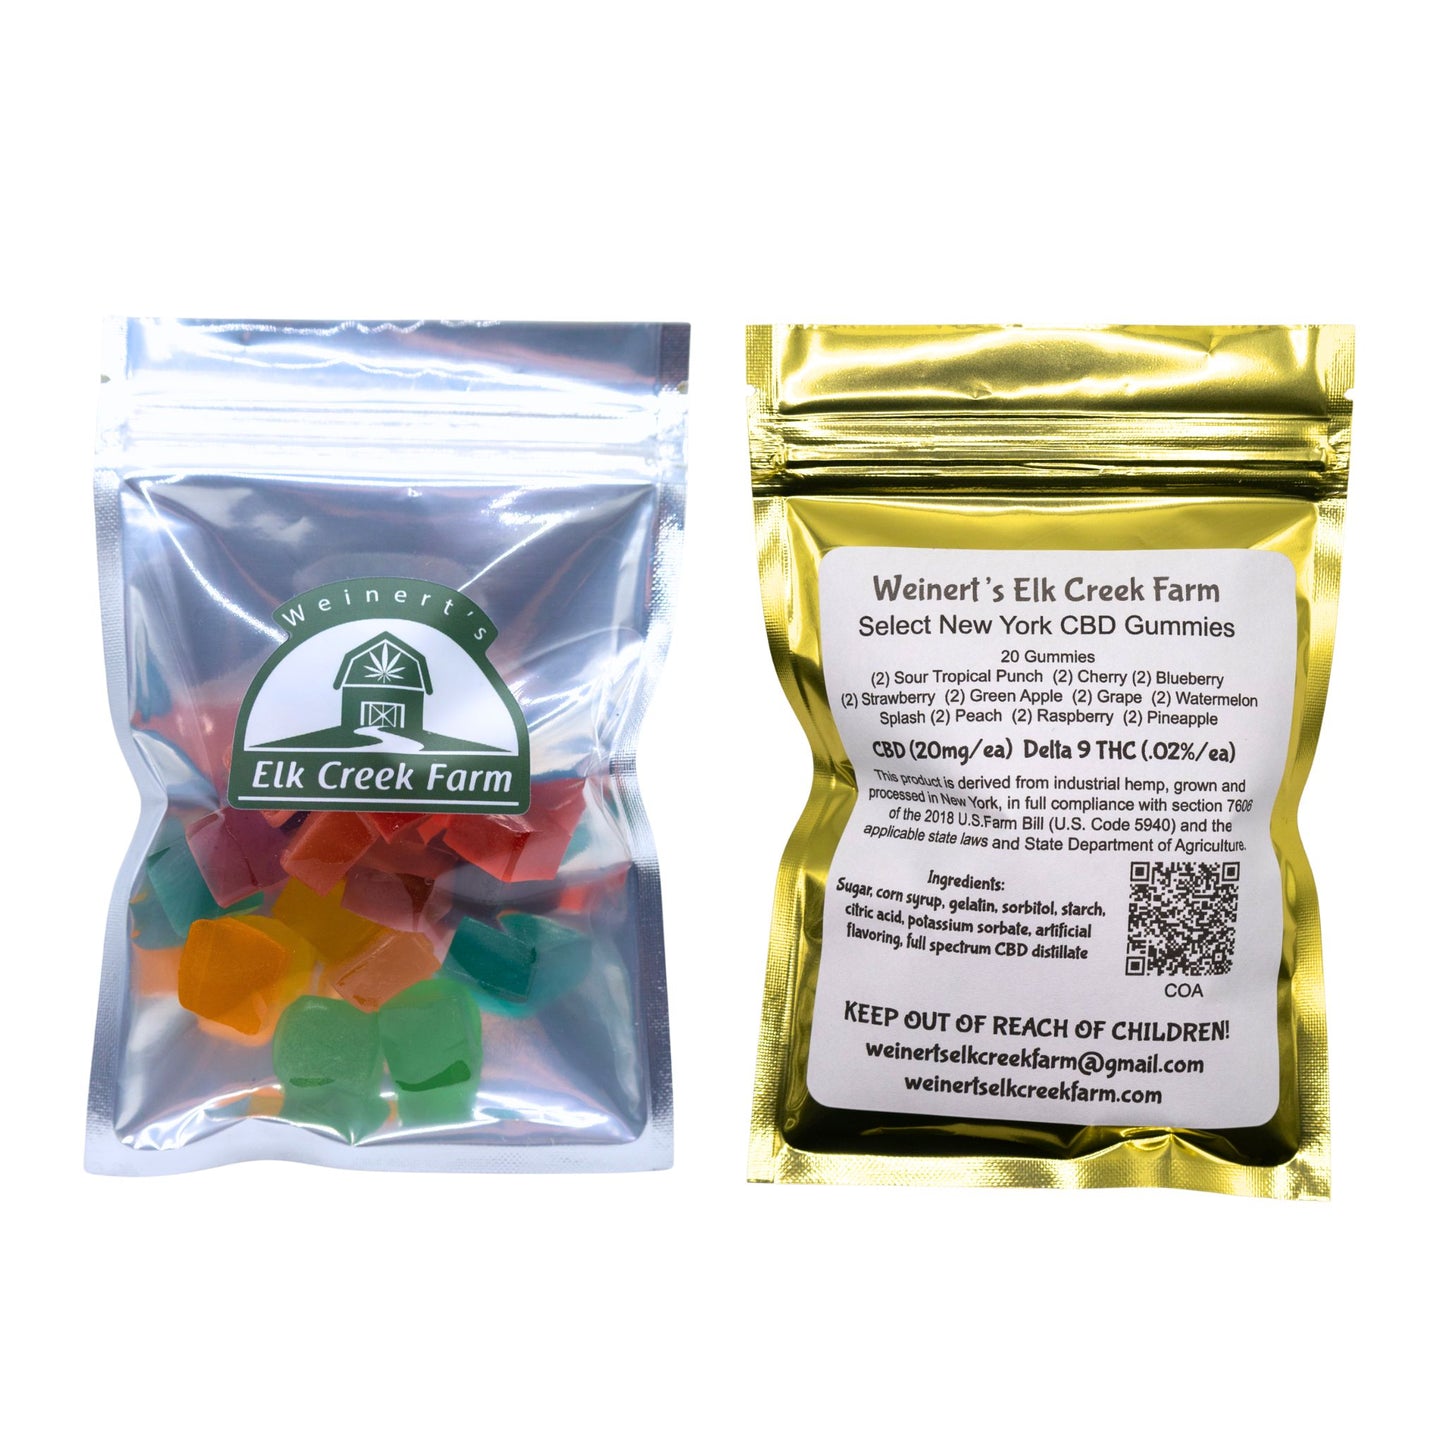 The front and back packaging of 400mg CBD infused Gummy Cubes.